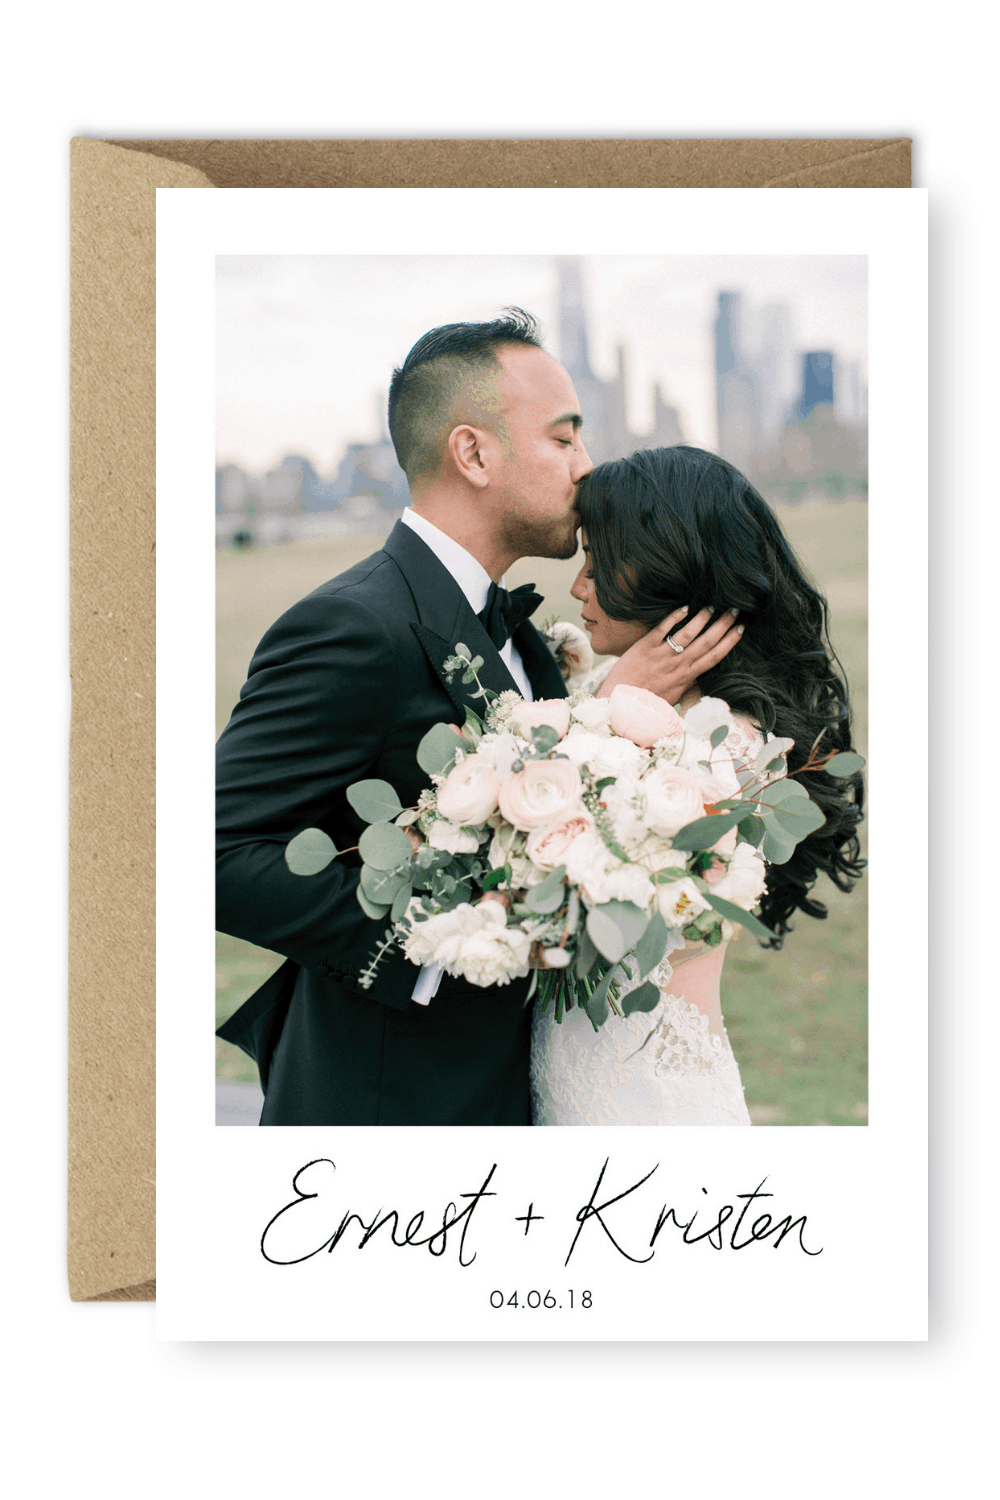 Floral Wedding Thank You Card Love and Light Photographs For the Love of Stationery